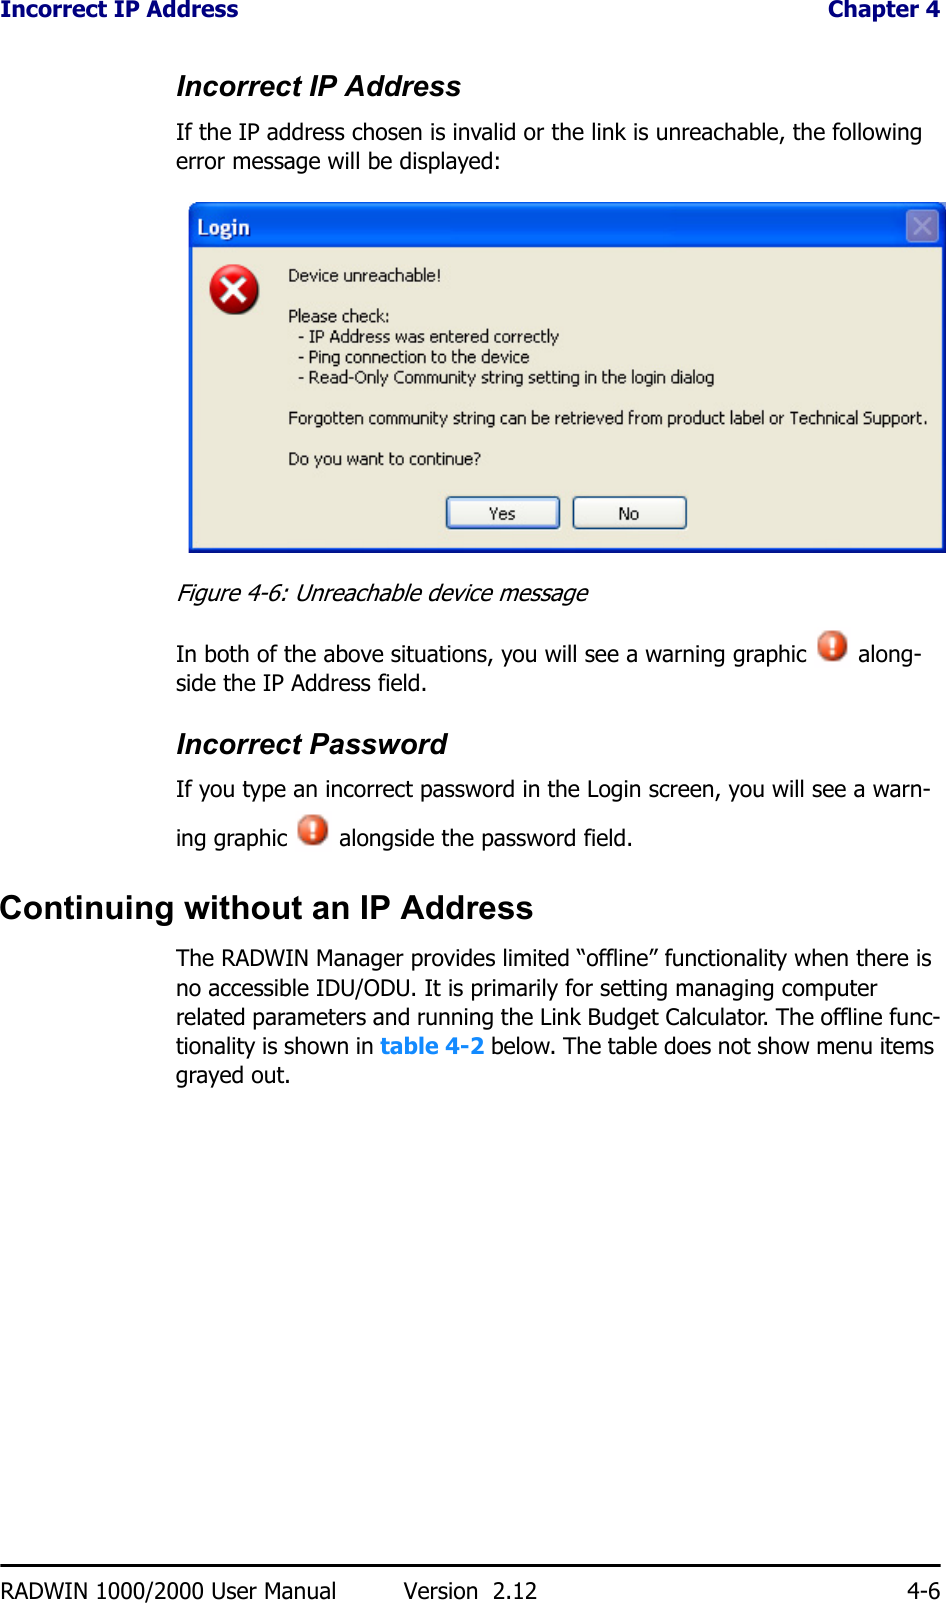 Incorrect IP Address  Chapter 4RADWIN 1000/2000 User Manual Version  2.12 4-6Incorrect IP AddressIf the IP address chosen is invalid or the link is unreachable, the following error message will be displayed:Figure 4-6: Unreachable device messageIn both of the above situations, you will see a warning graphic   along-side the IP Address field.Incorrect PasswordIf you type an incorrect password in the Login screen, you will see a warn-ing graphic   alongside the password field.Continuing without an IP AddressThe RADWIN Manager provides limited “offline” functionality when there is no accessible IDU/ODU. It is primarily for setting managing computer related parameters and running the Link Budget Calculator. The offline func-tionality is shown in table 4-2 below. The table does not show menu items grayed out.